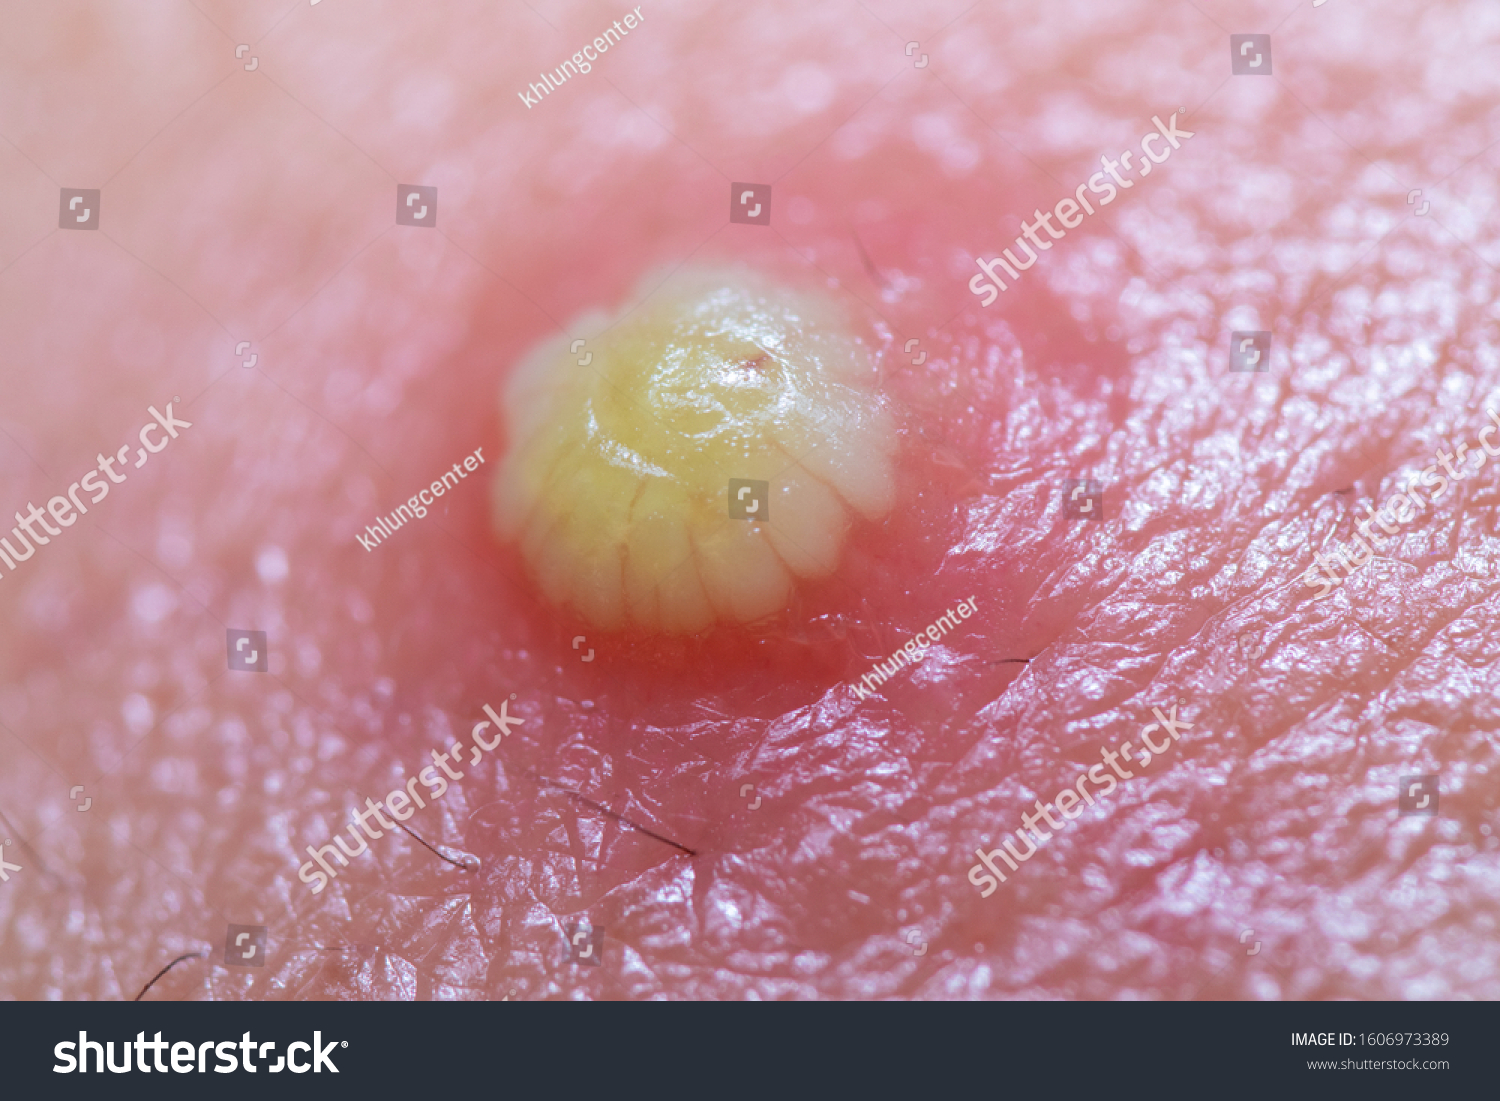 white pimple with puss